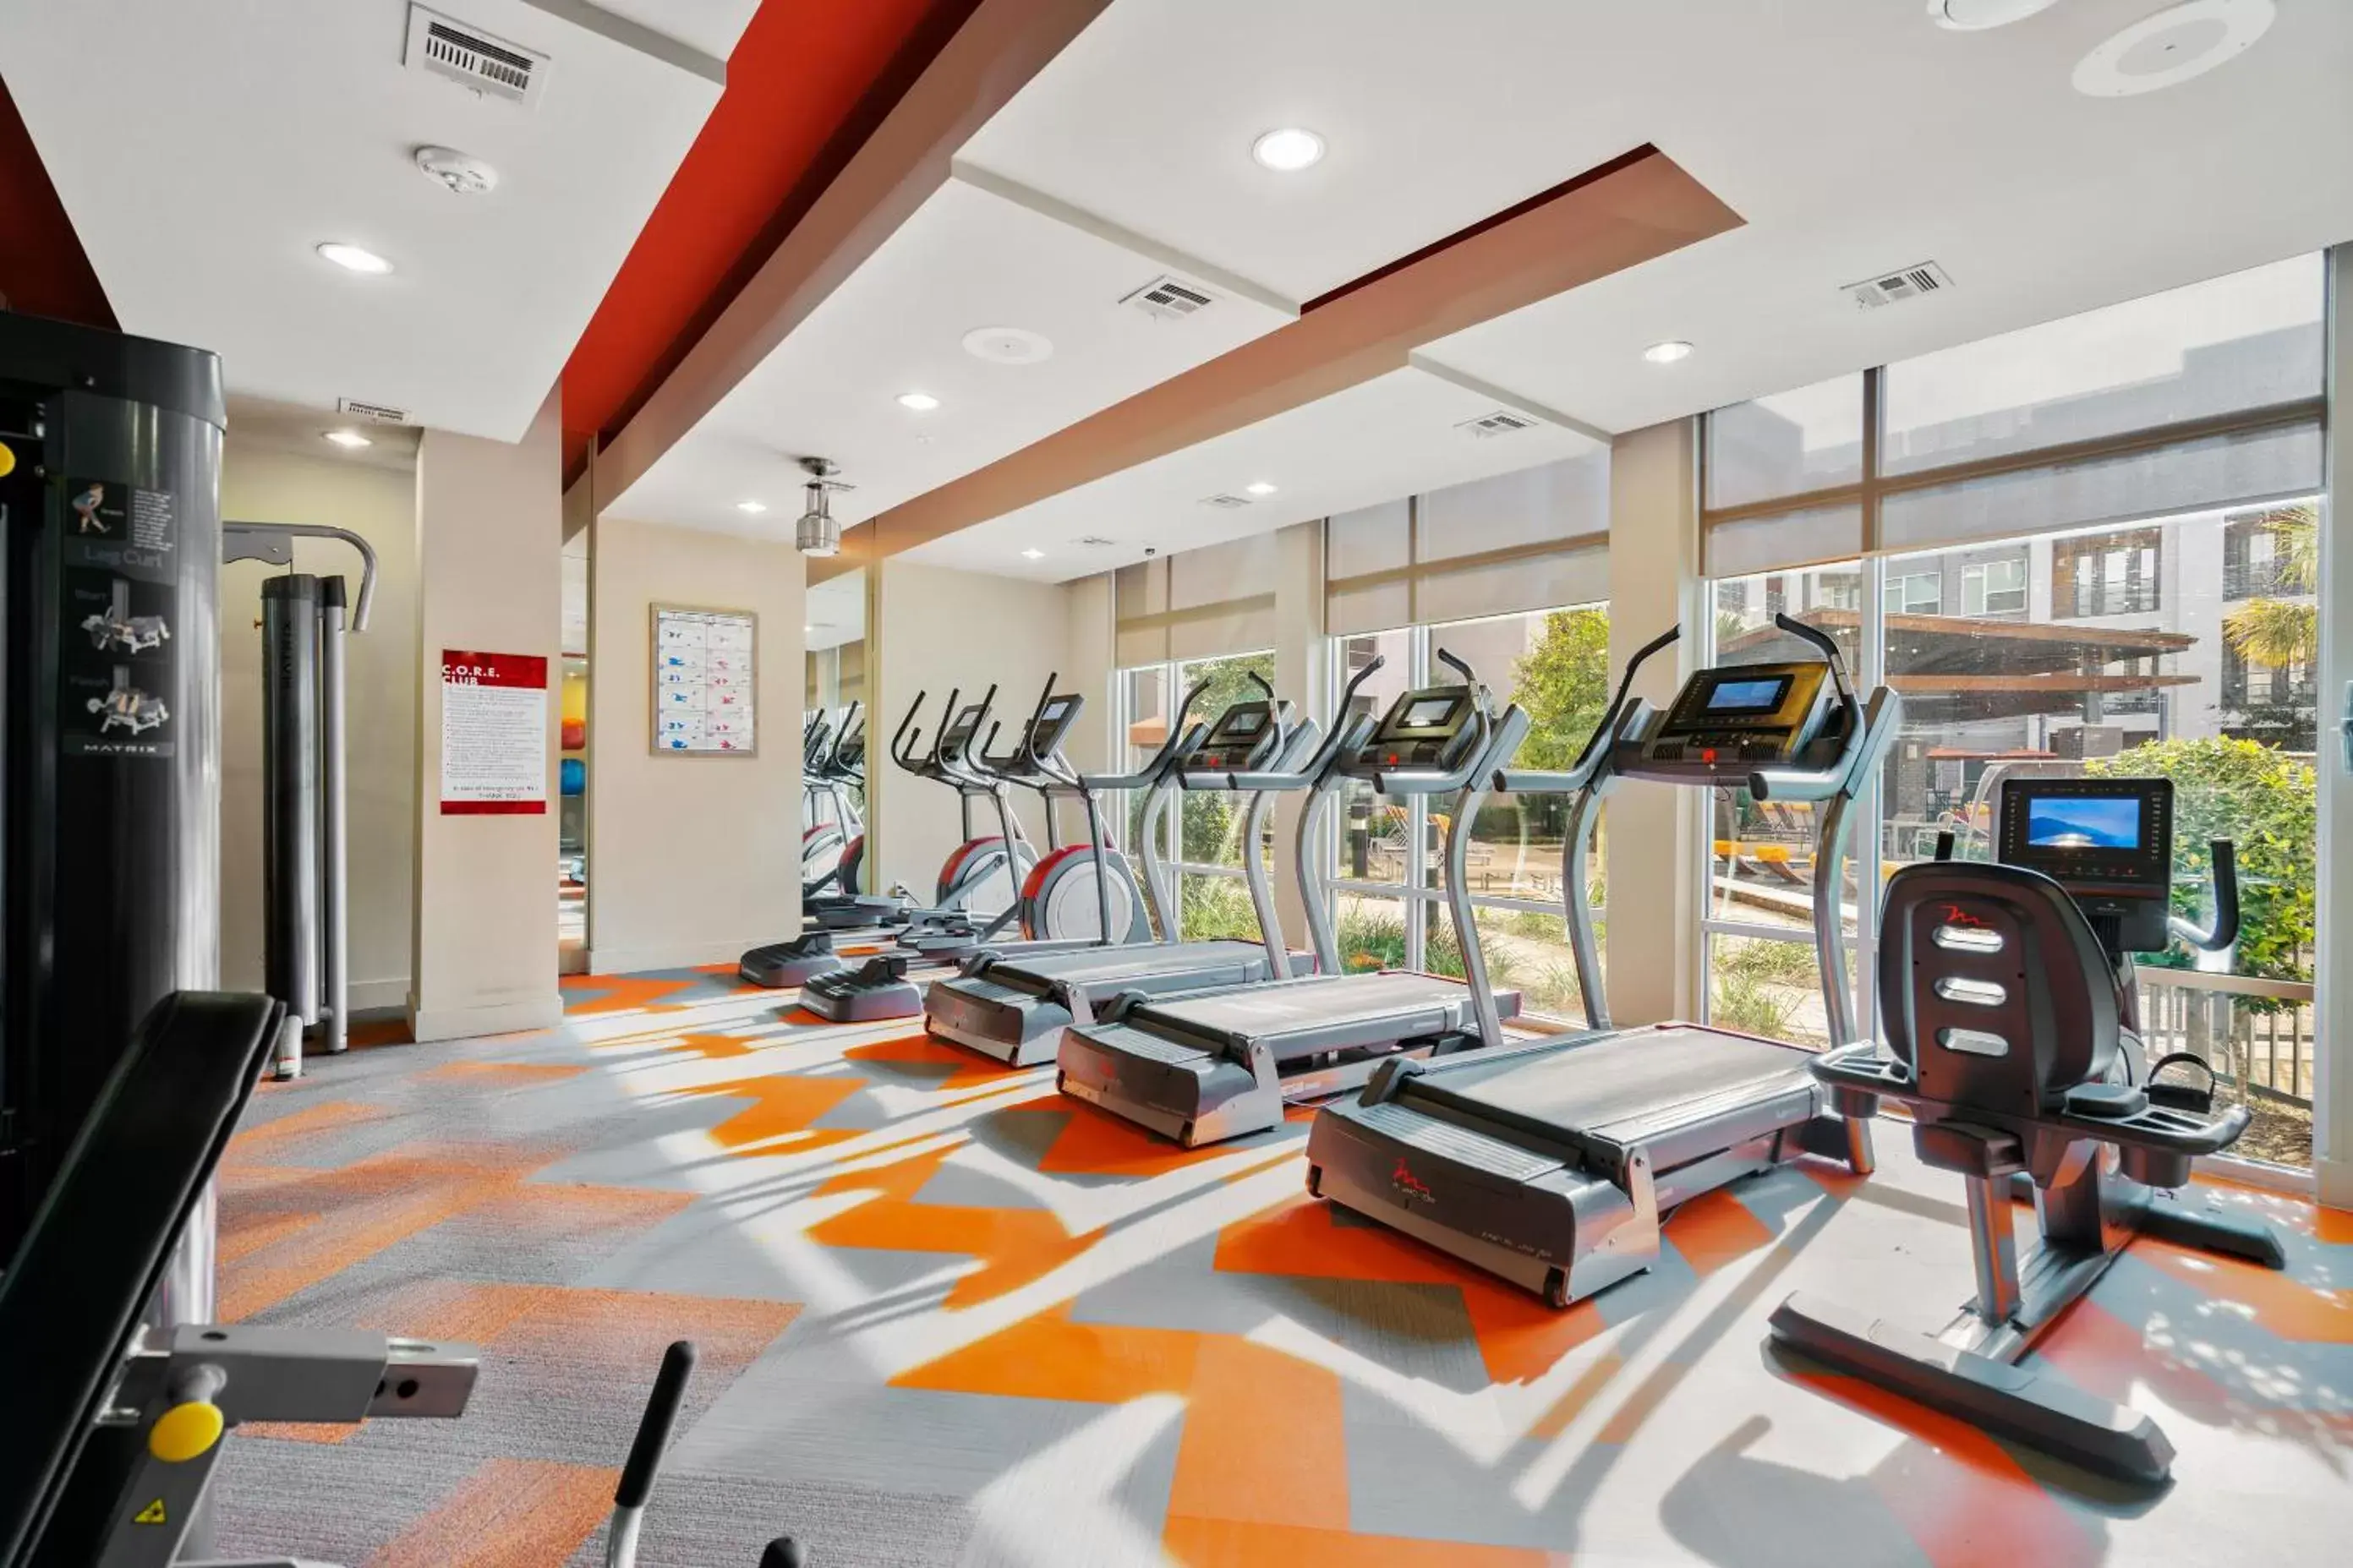 Fitness centre/facilities, Fitness Center/Facilities in Kasa Love Field-Medical District Dallas